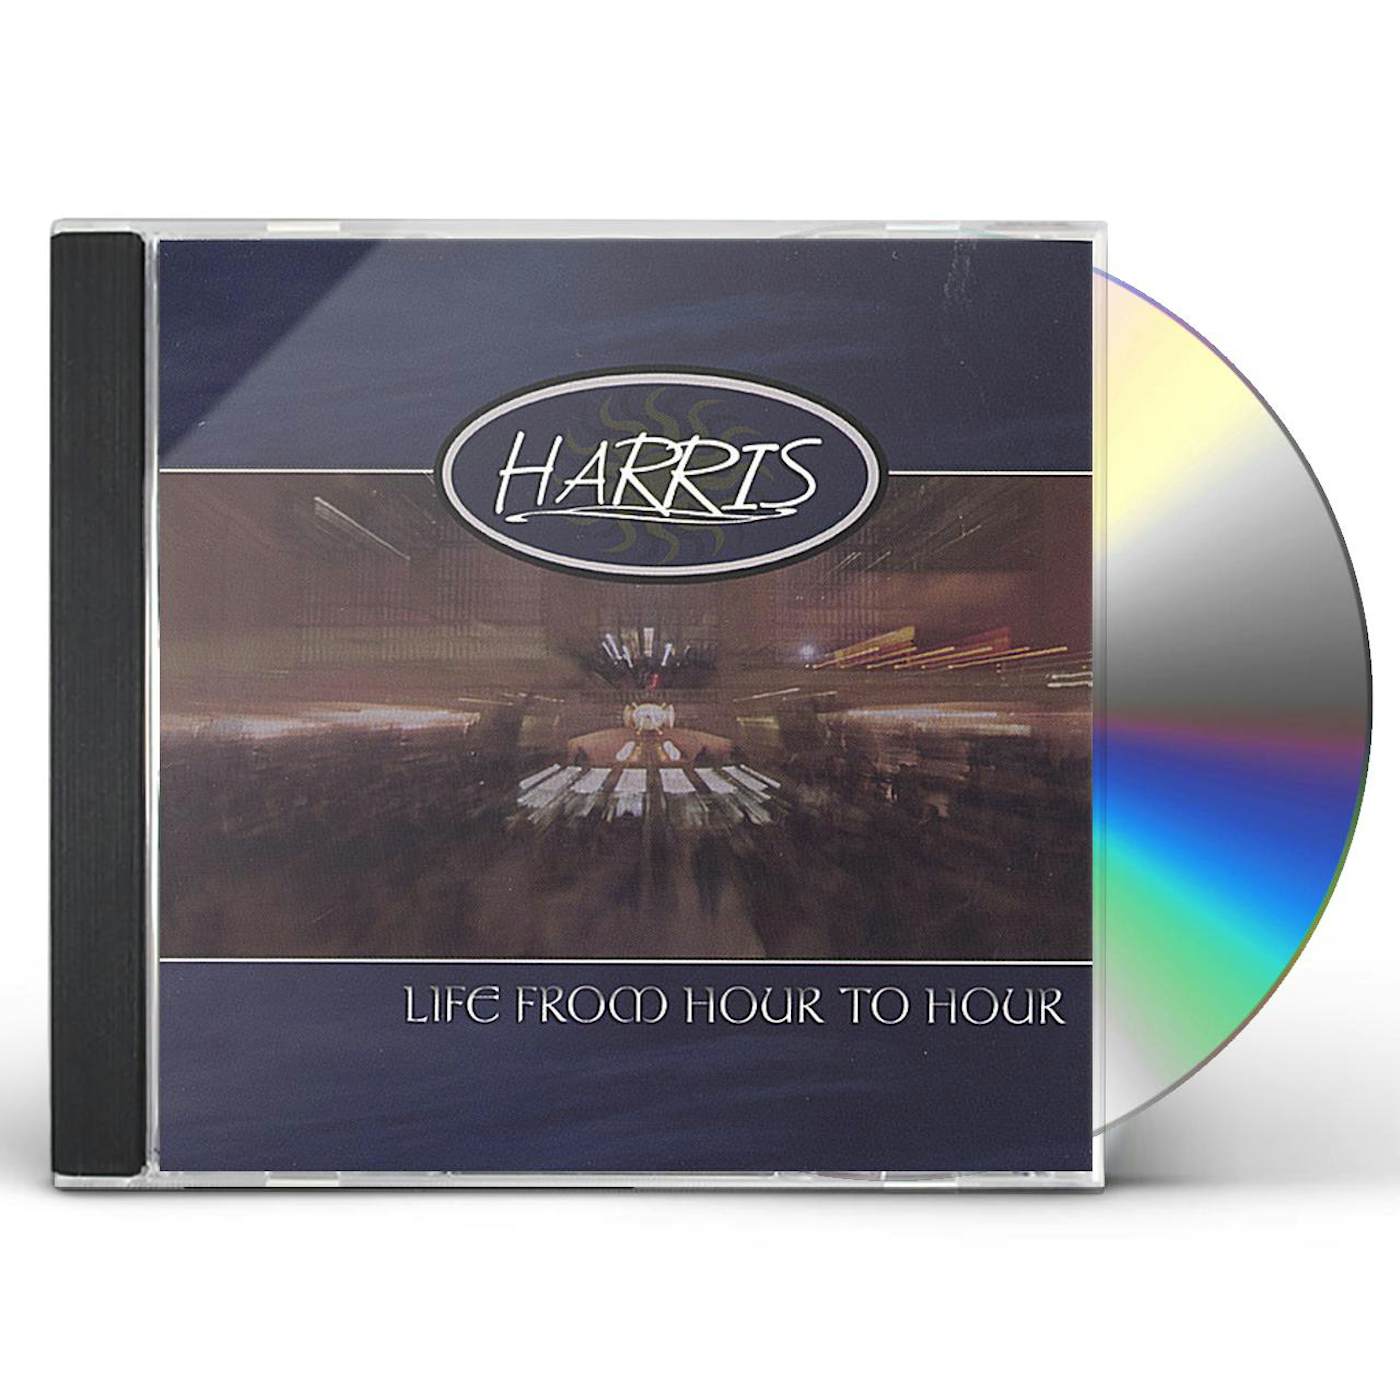 Harris LIFE FROM HOUR TO HOUR CD